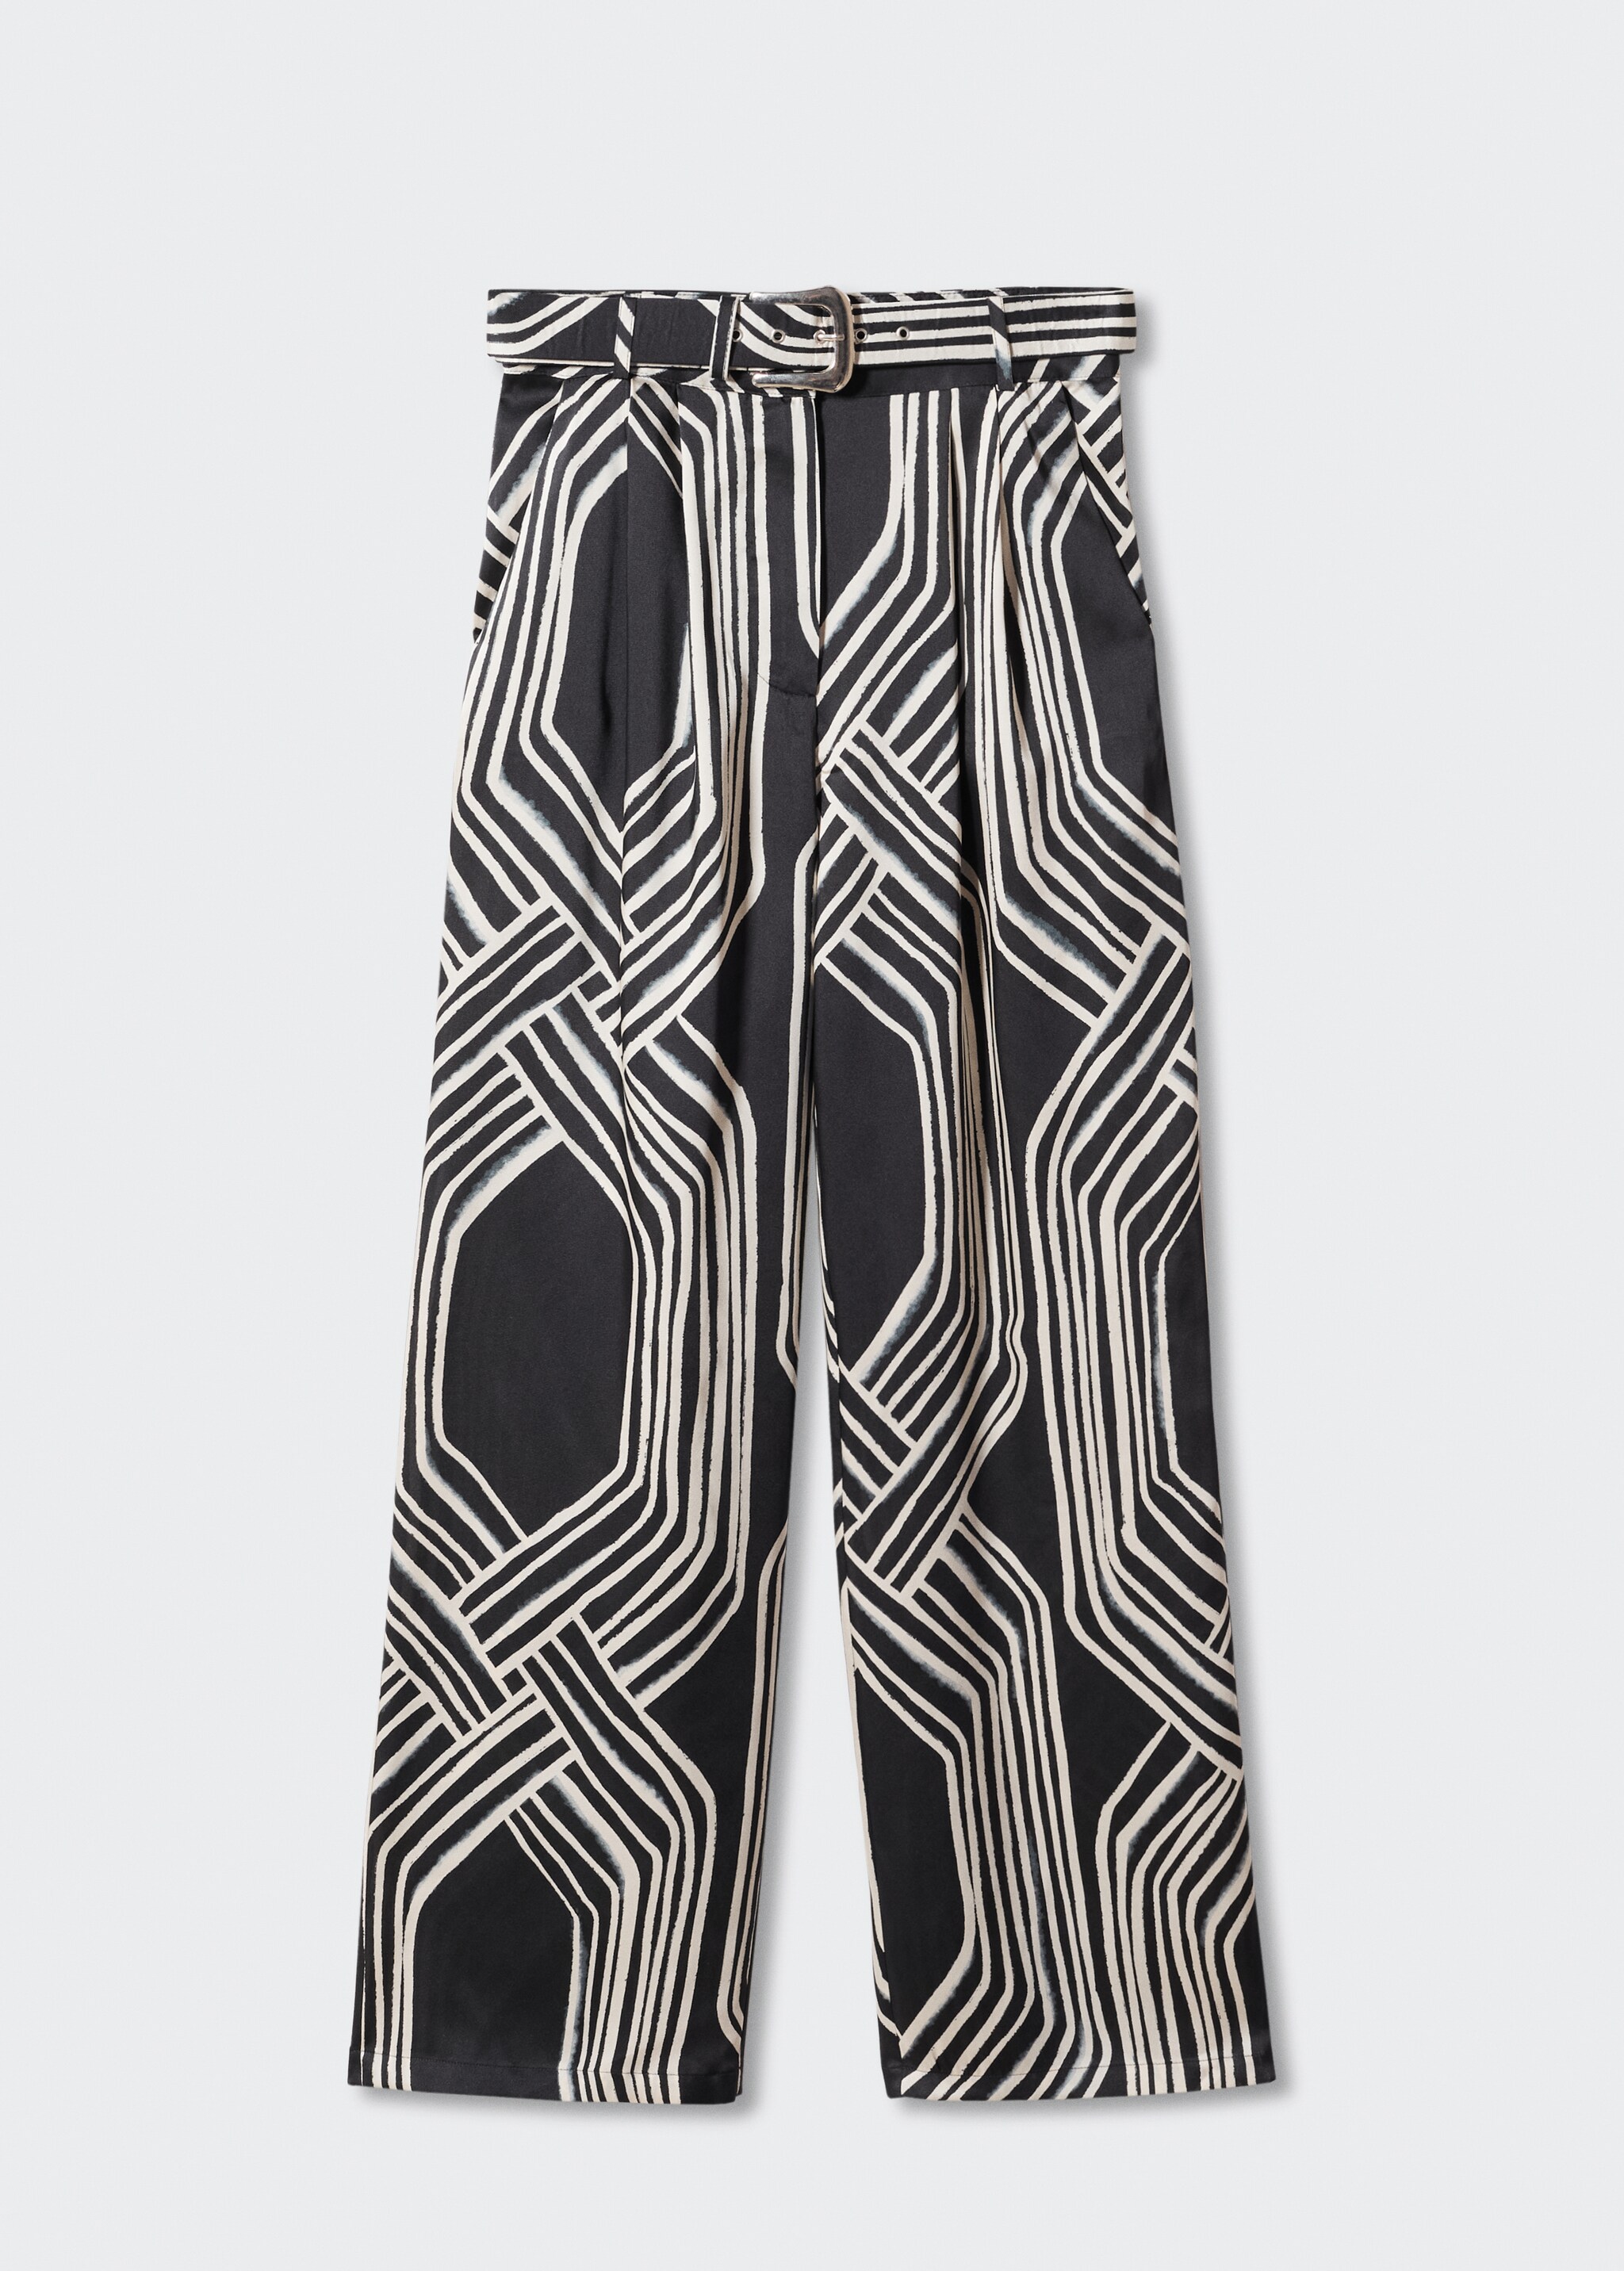 Printed culottes - Article without model